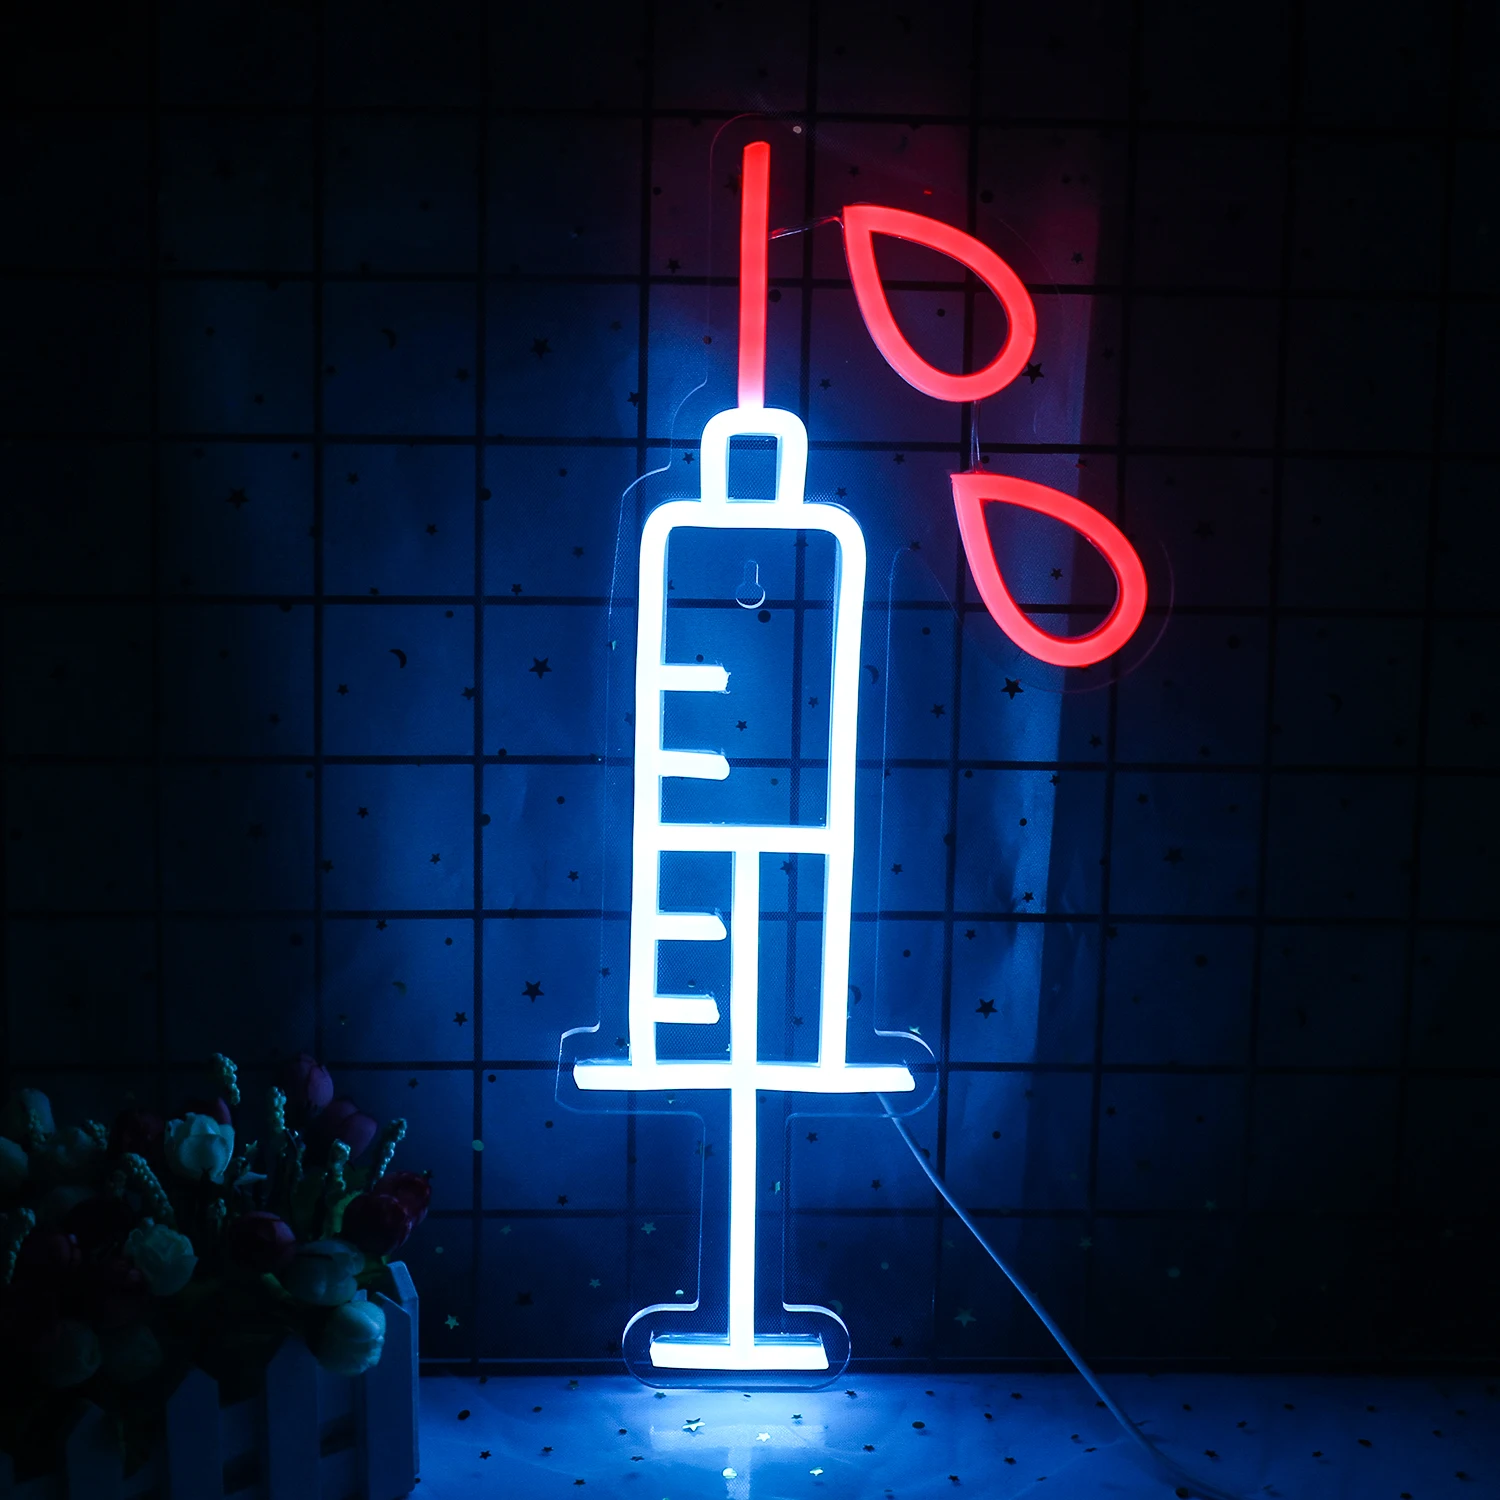 Interesting Syringe Neon Sign Led Light Needle Restaurant Bar Venue Party Room Shop Neon Art Wall Decor Child Personality Gift